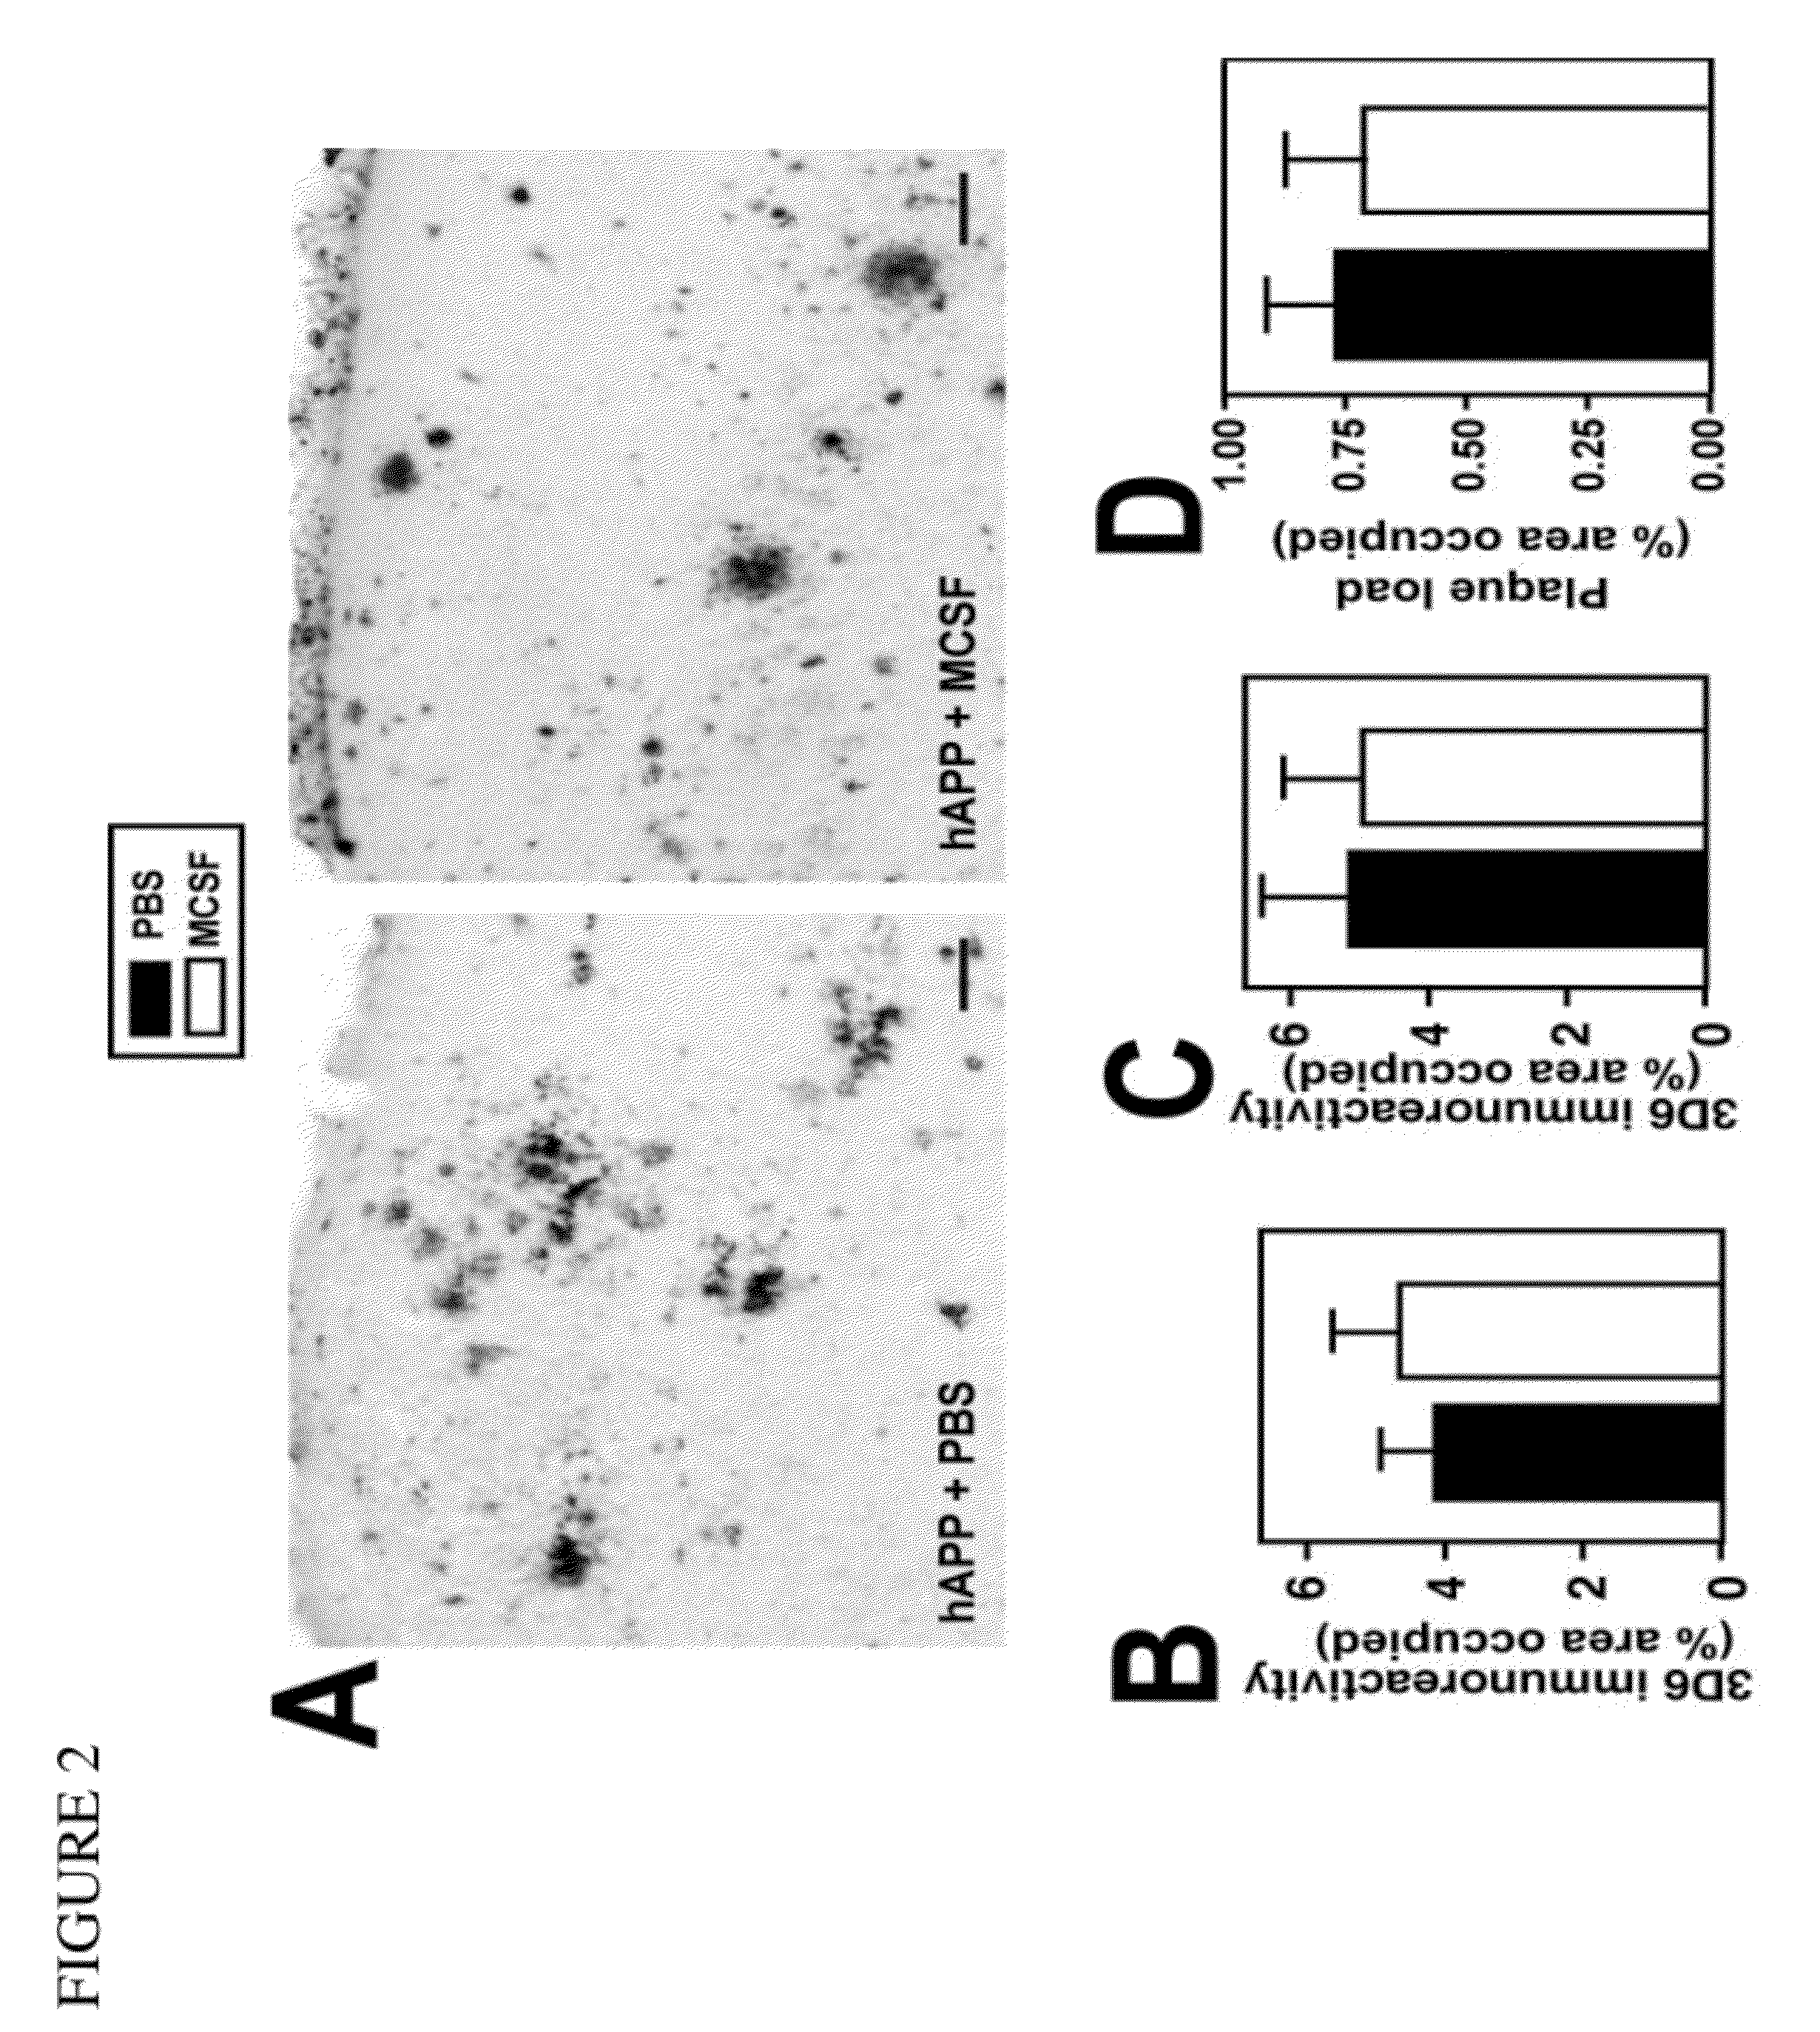 Methods of neuroprotection involving macrophage colony stimulating factor receptor agonists